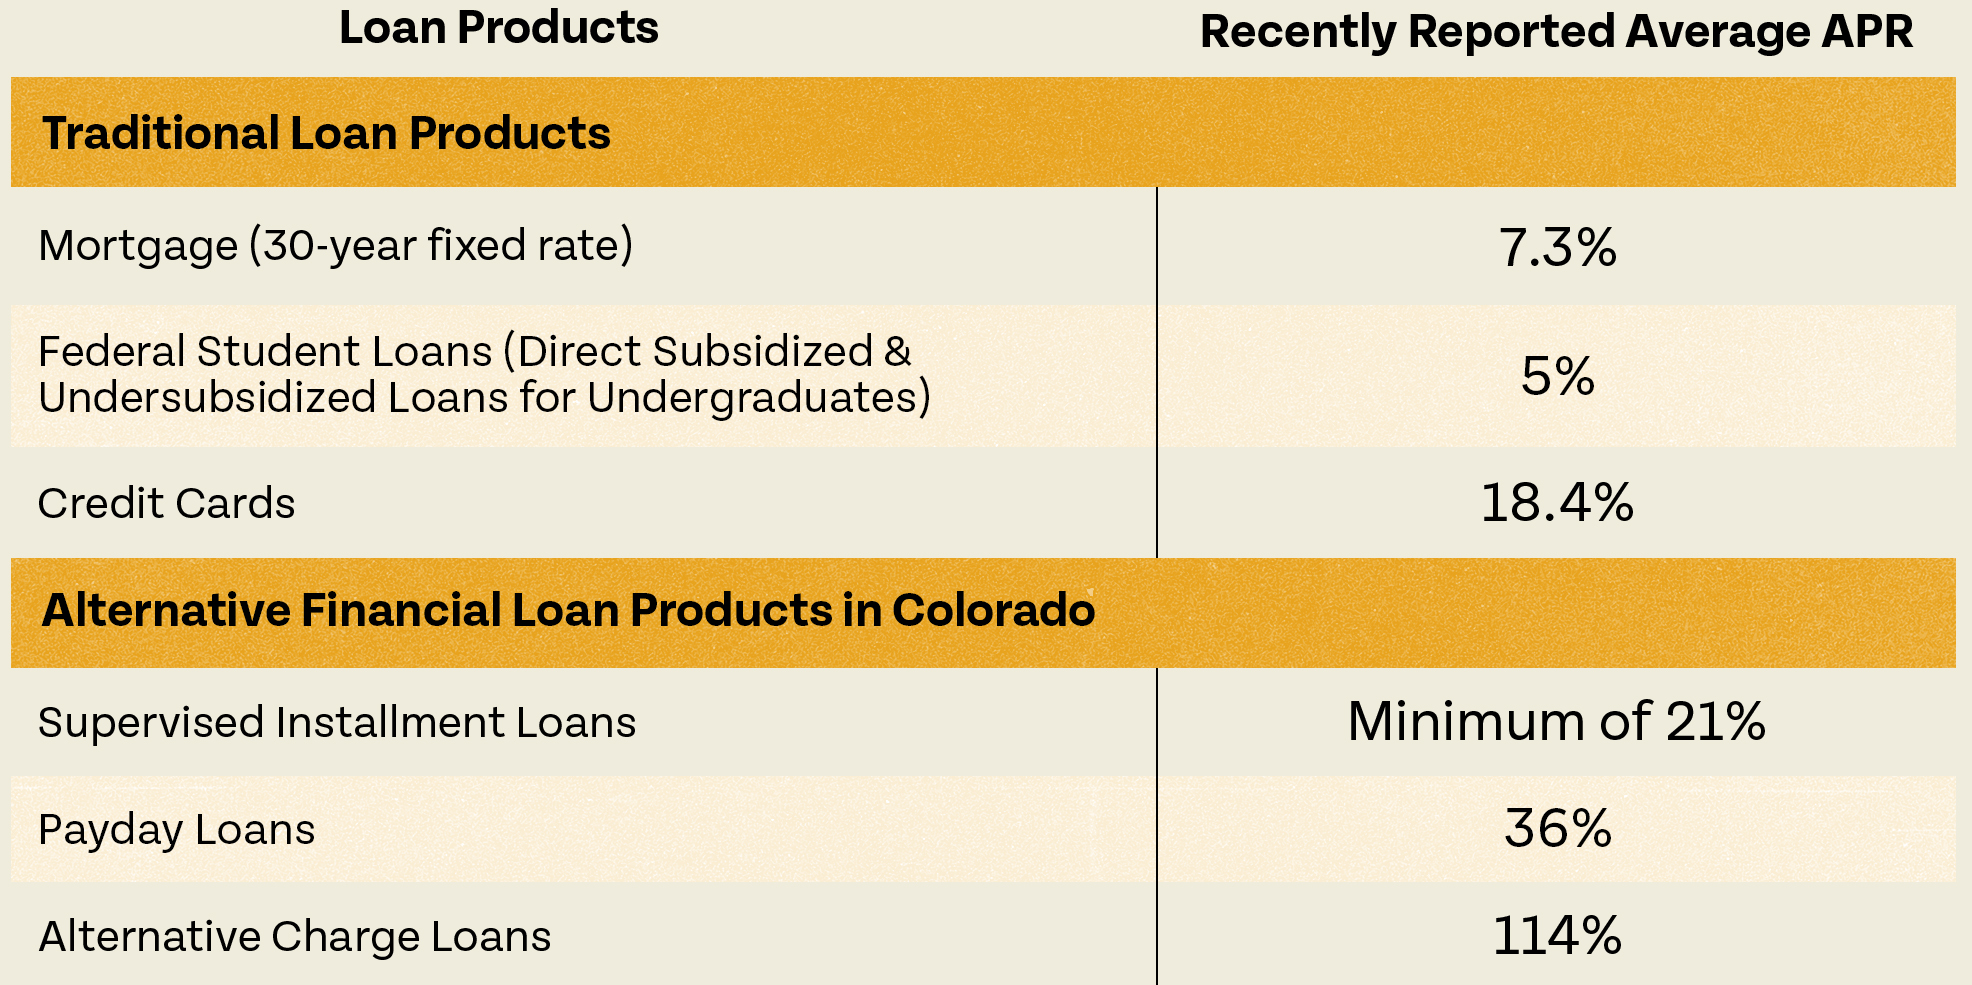 Loan Products and Reported APR